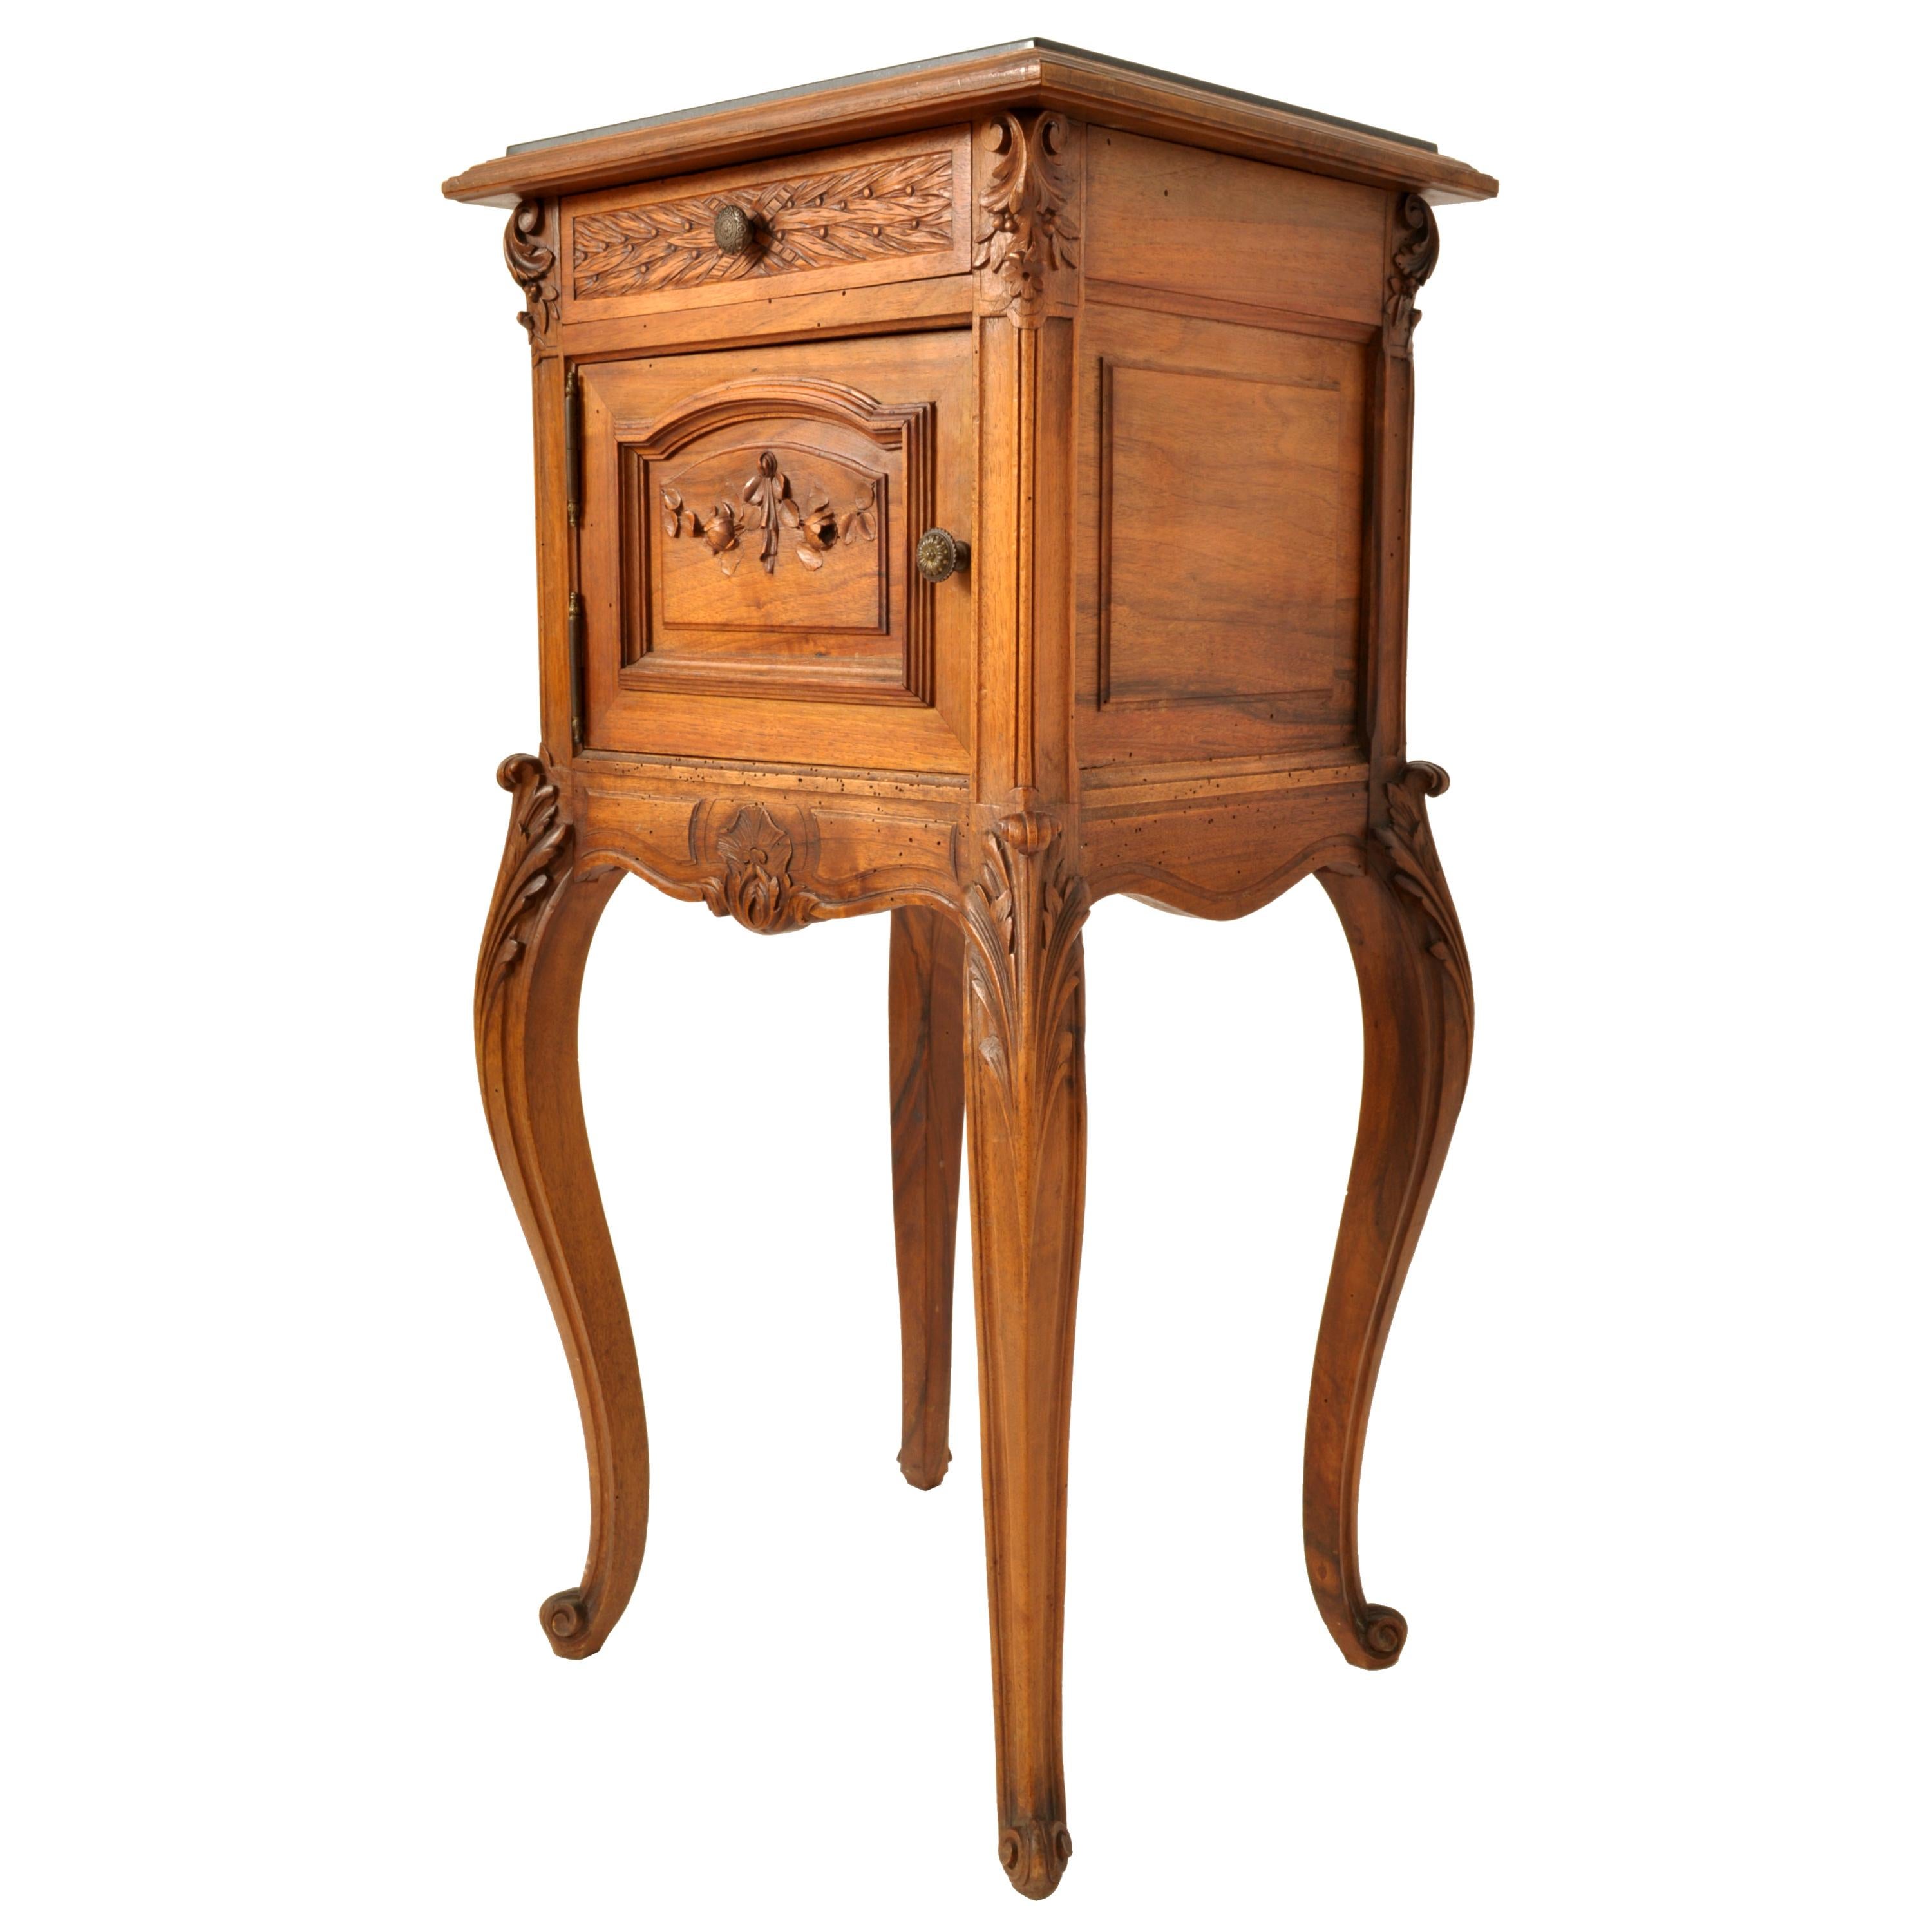 A good antique French Louis XVI Provincial carved walnut and marble top night stand, circa 1880.
The stand having a black marble inset top, below is a single drawer with a carved front and carved acanthus leaf brackets to each side, the stand